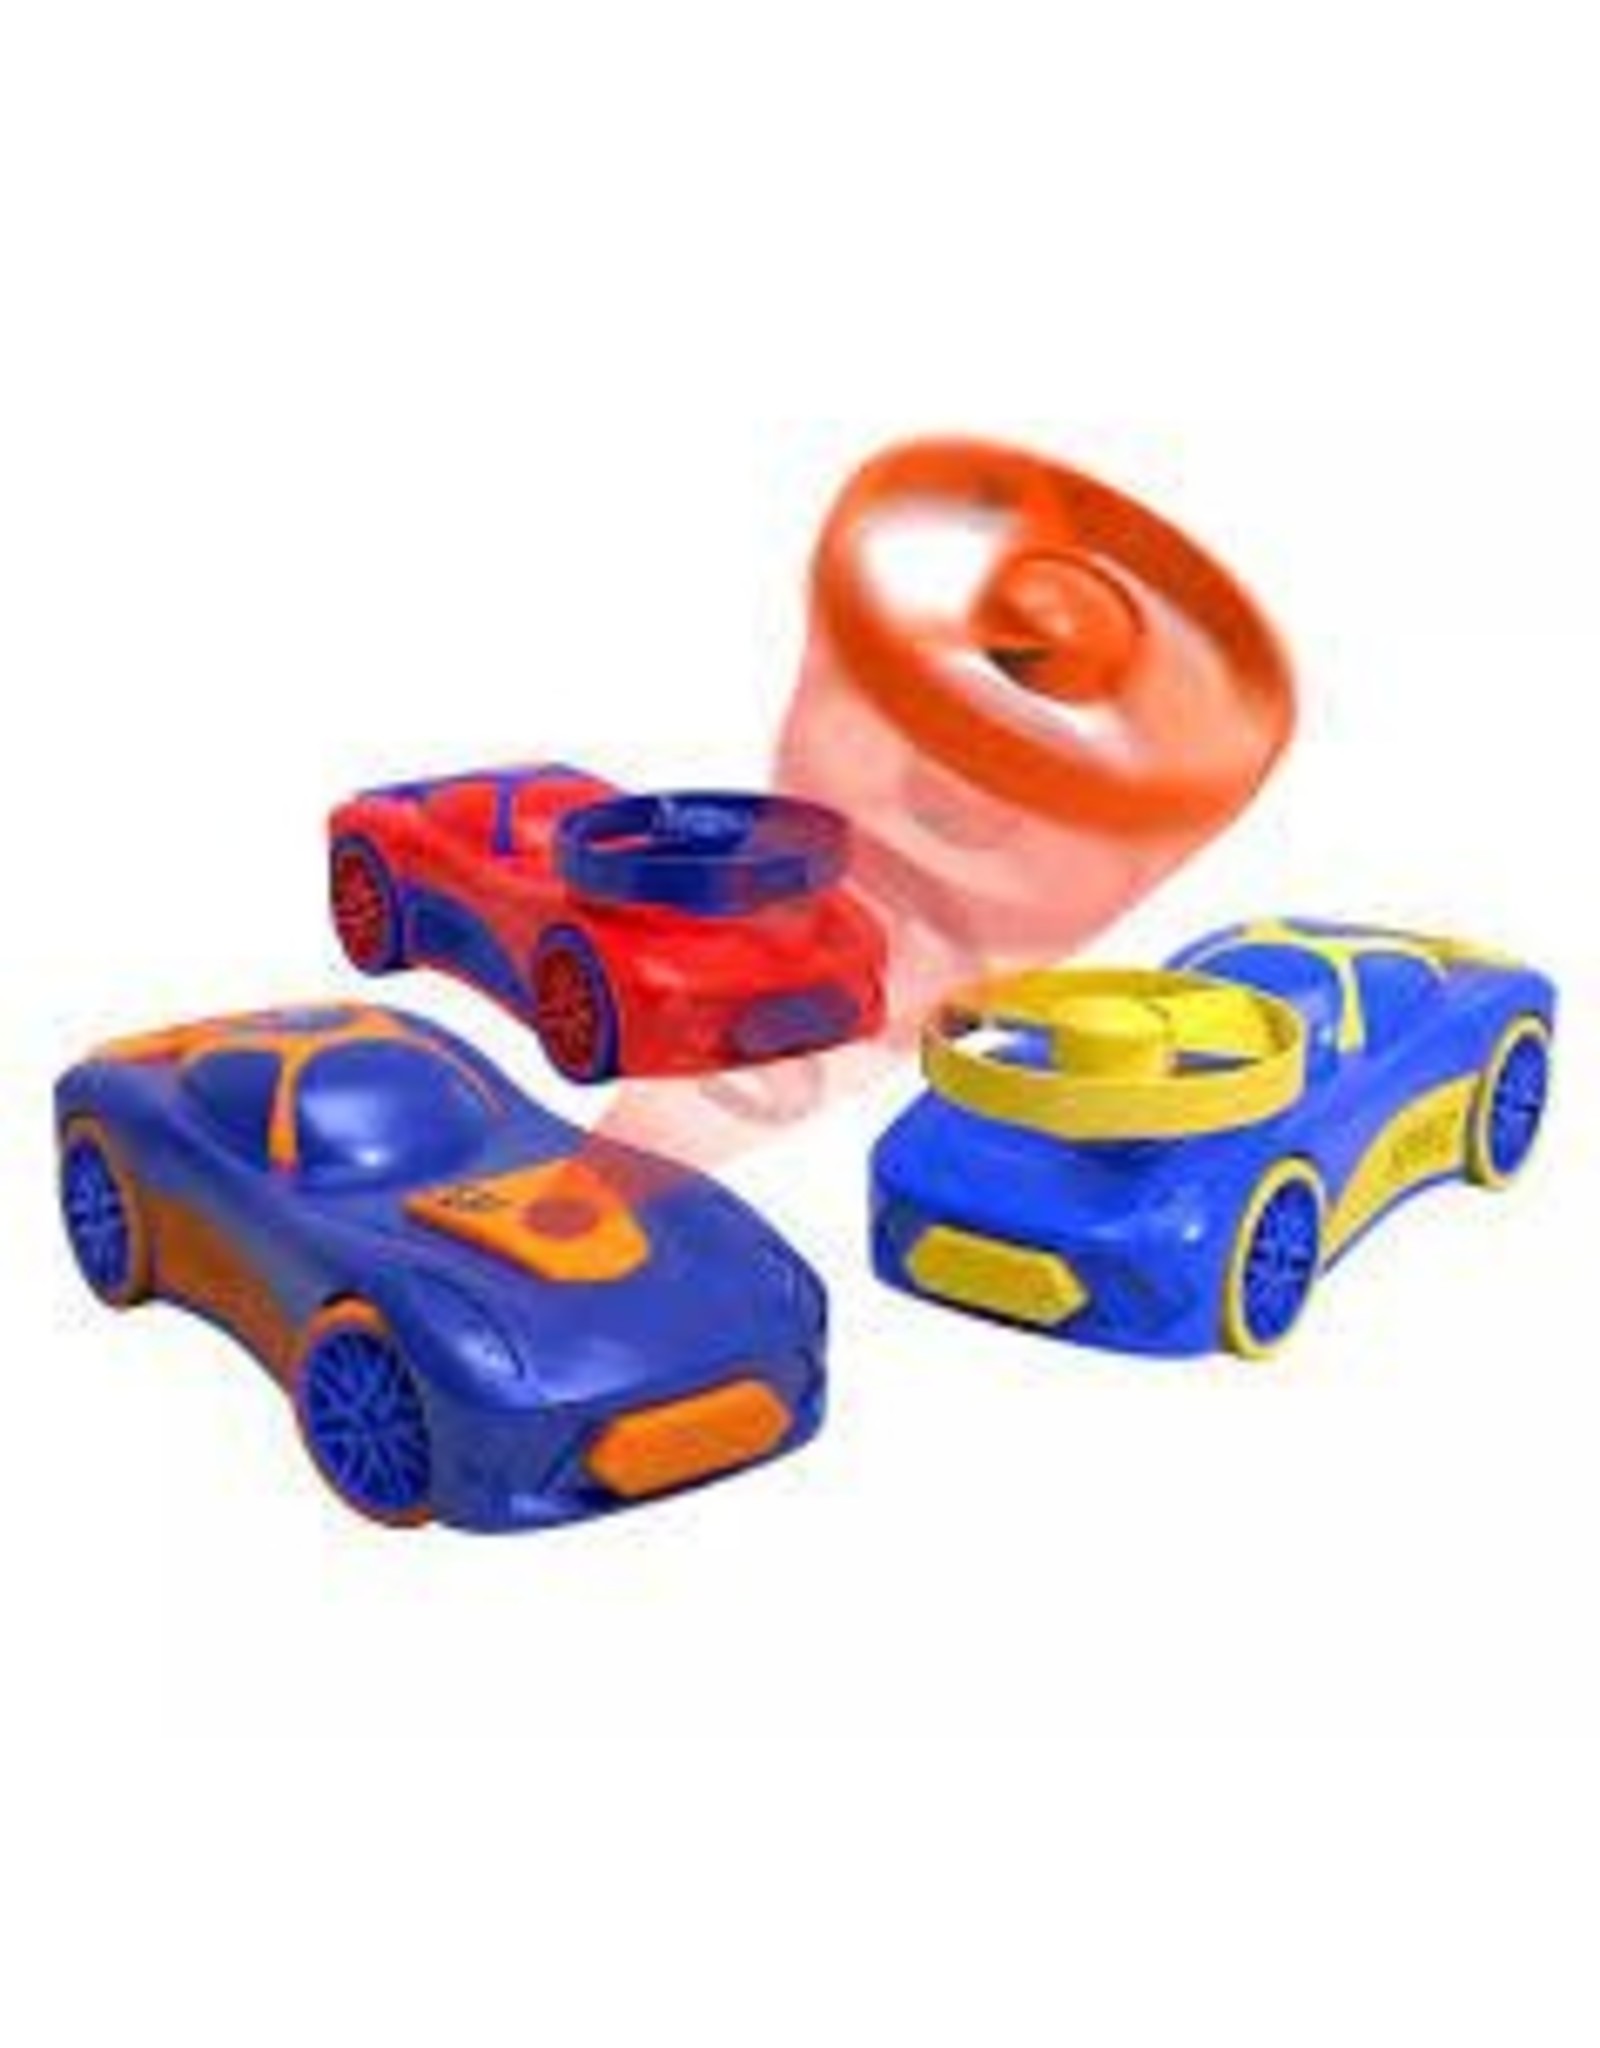 Spinz Pull Back Race Car Blue with Orange